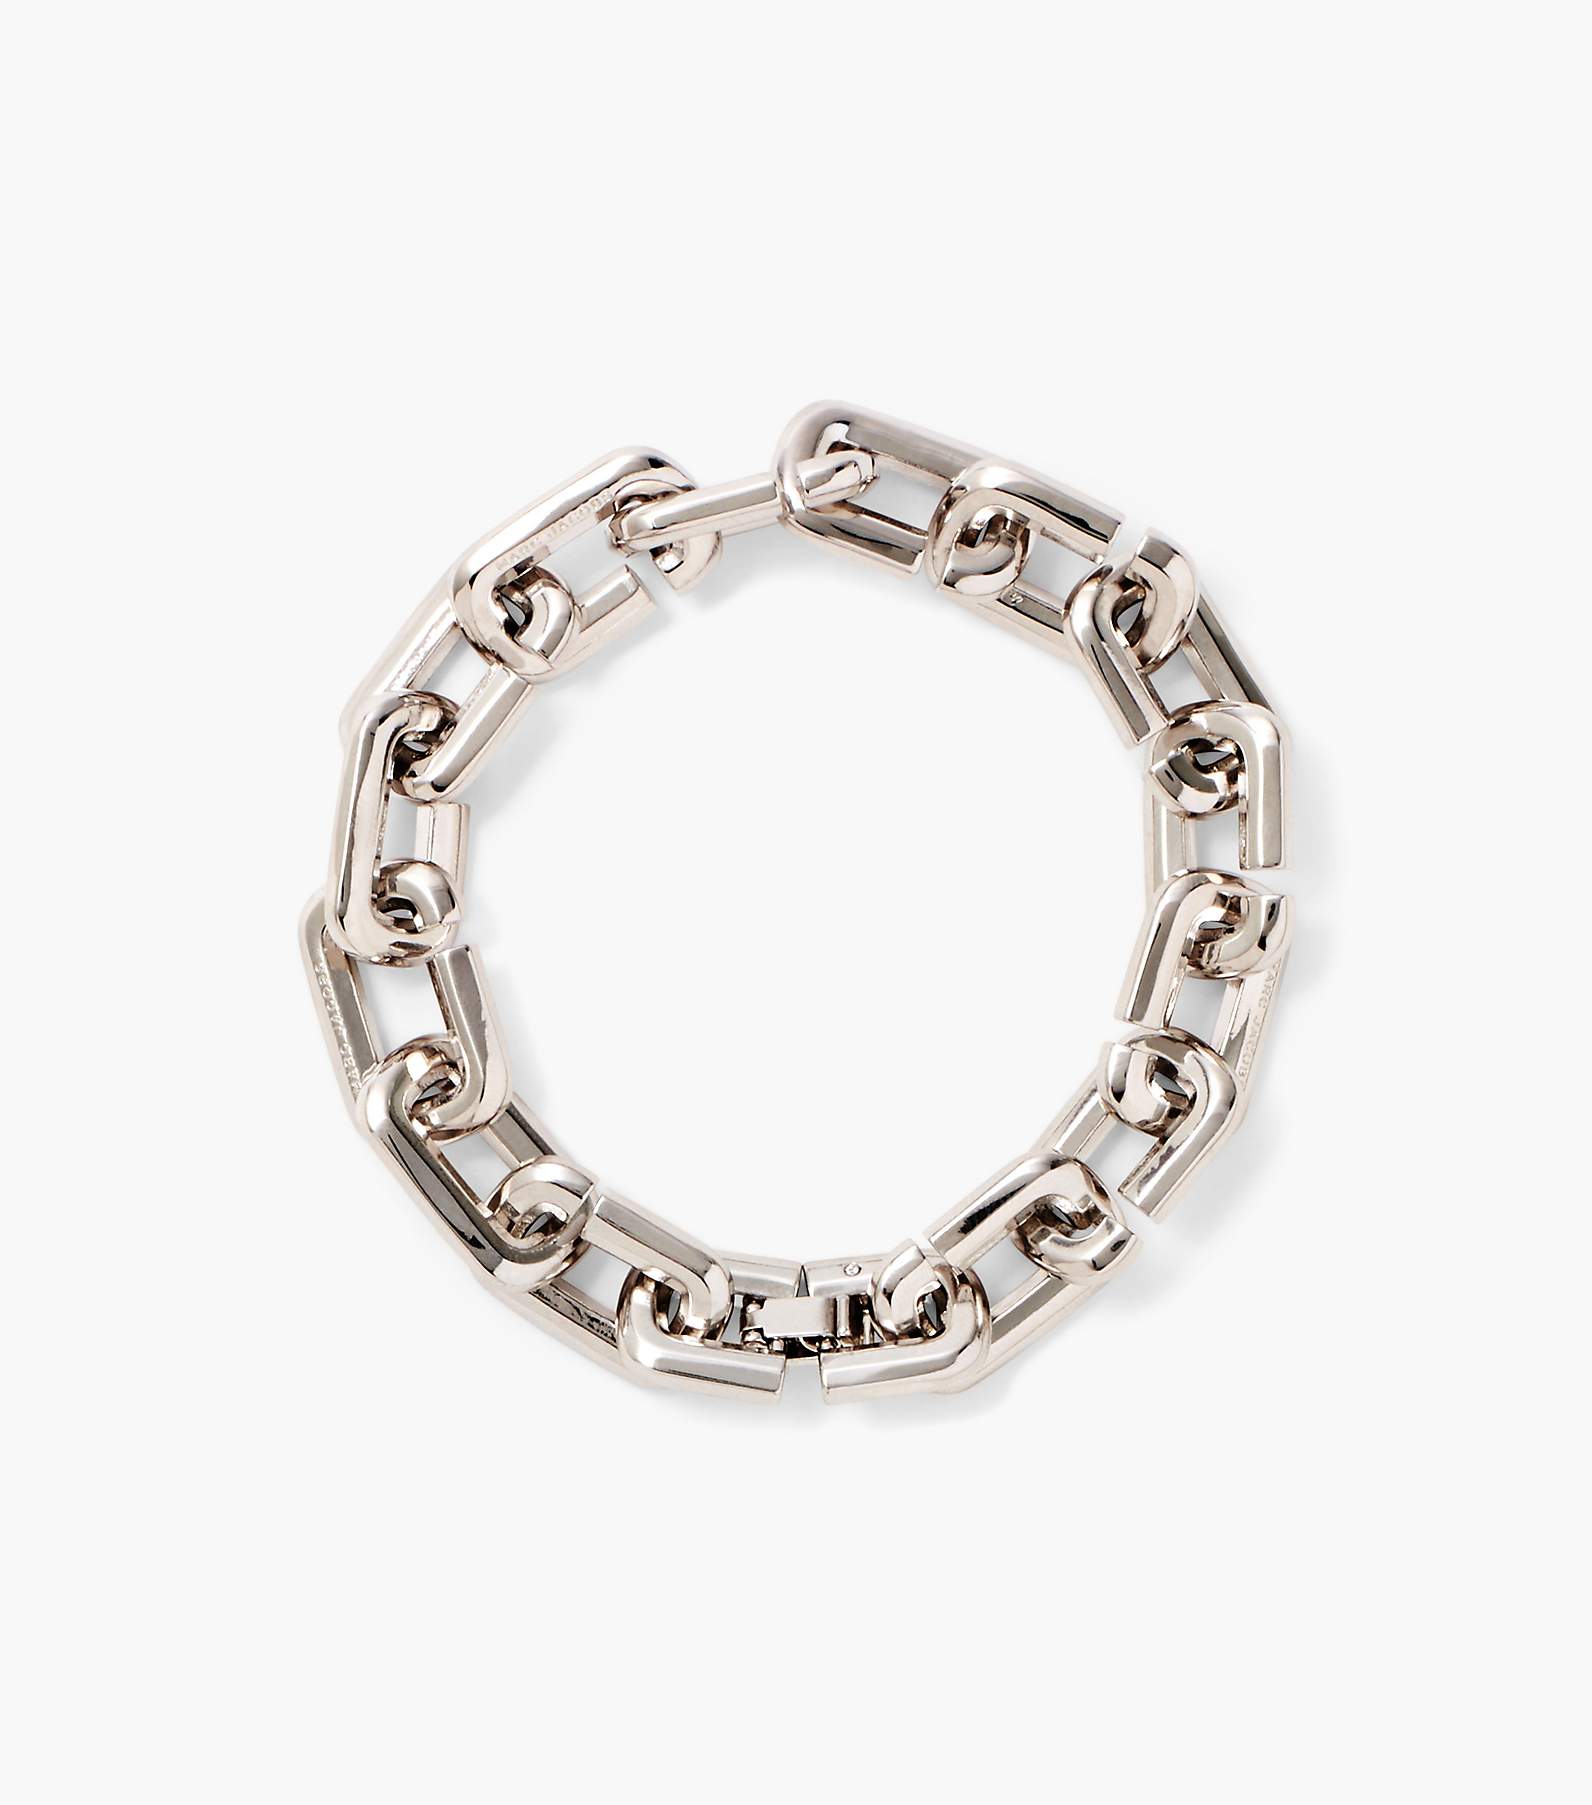 Marc Jacobs Women's ID Chain Bracelet in Aged Silver | END. Clothing